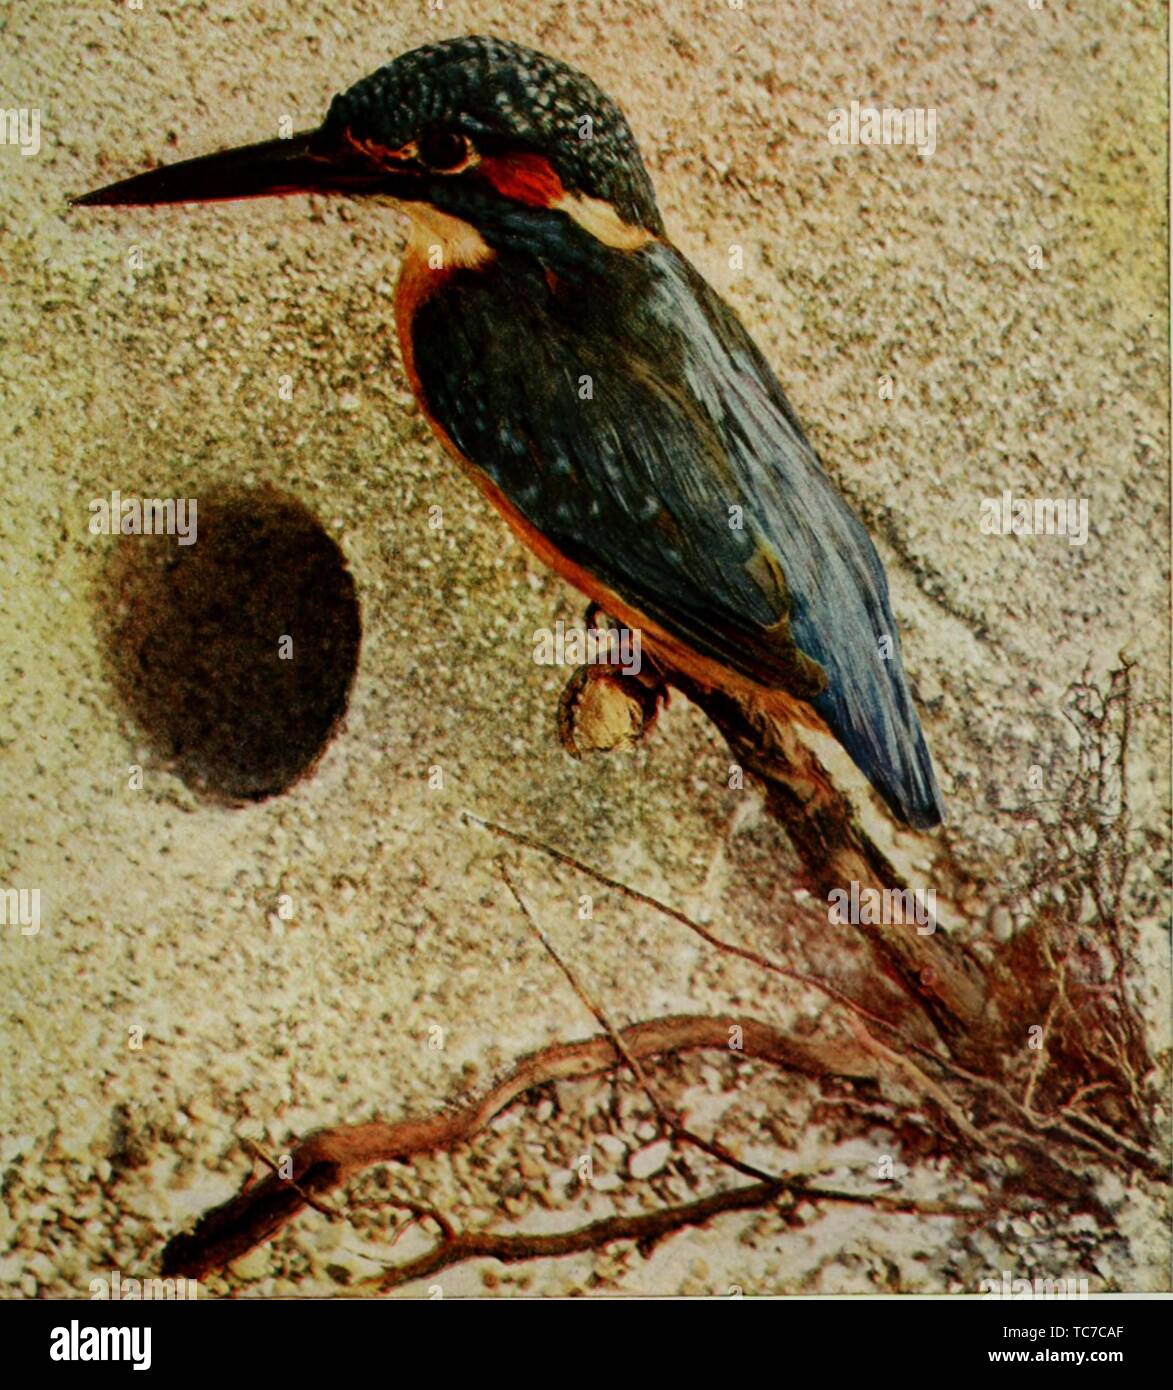 Engraved drawing of the European Kingfisher (Alcedo ispida), from the book 'Nature neighbors' by Nathaniel Moore Banta, Albert Schneider, William Kerr Higley, and Gerard Alan Abbott, 1914. Courtesy Internet Archive. () Stock Photo